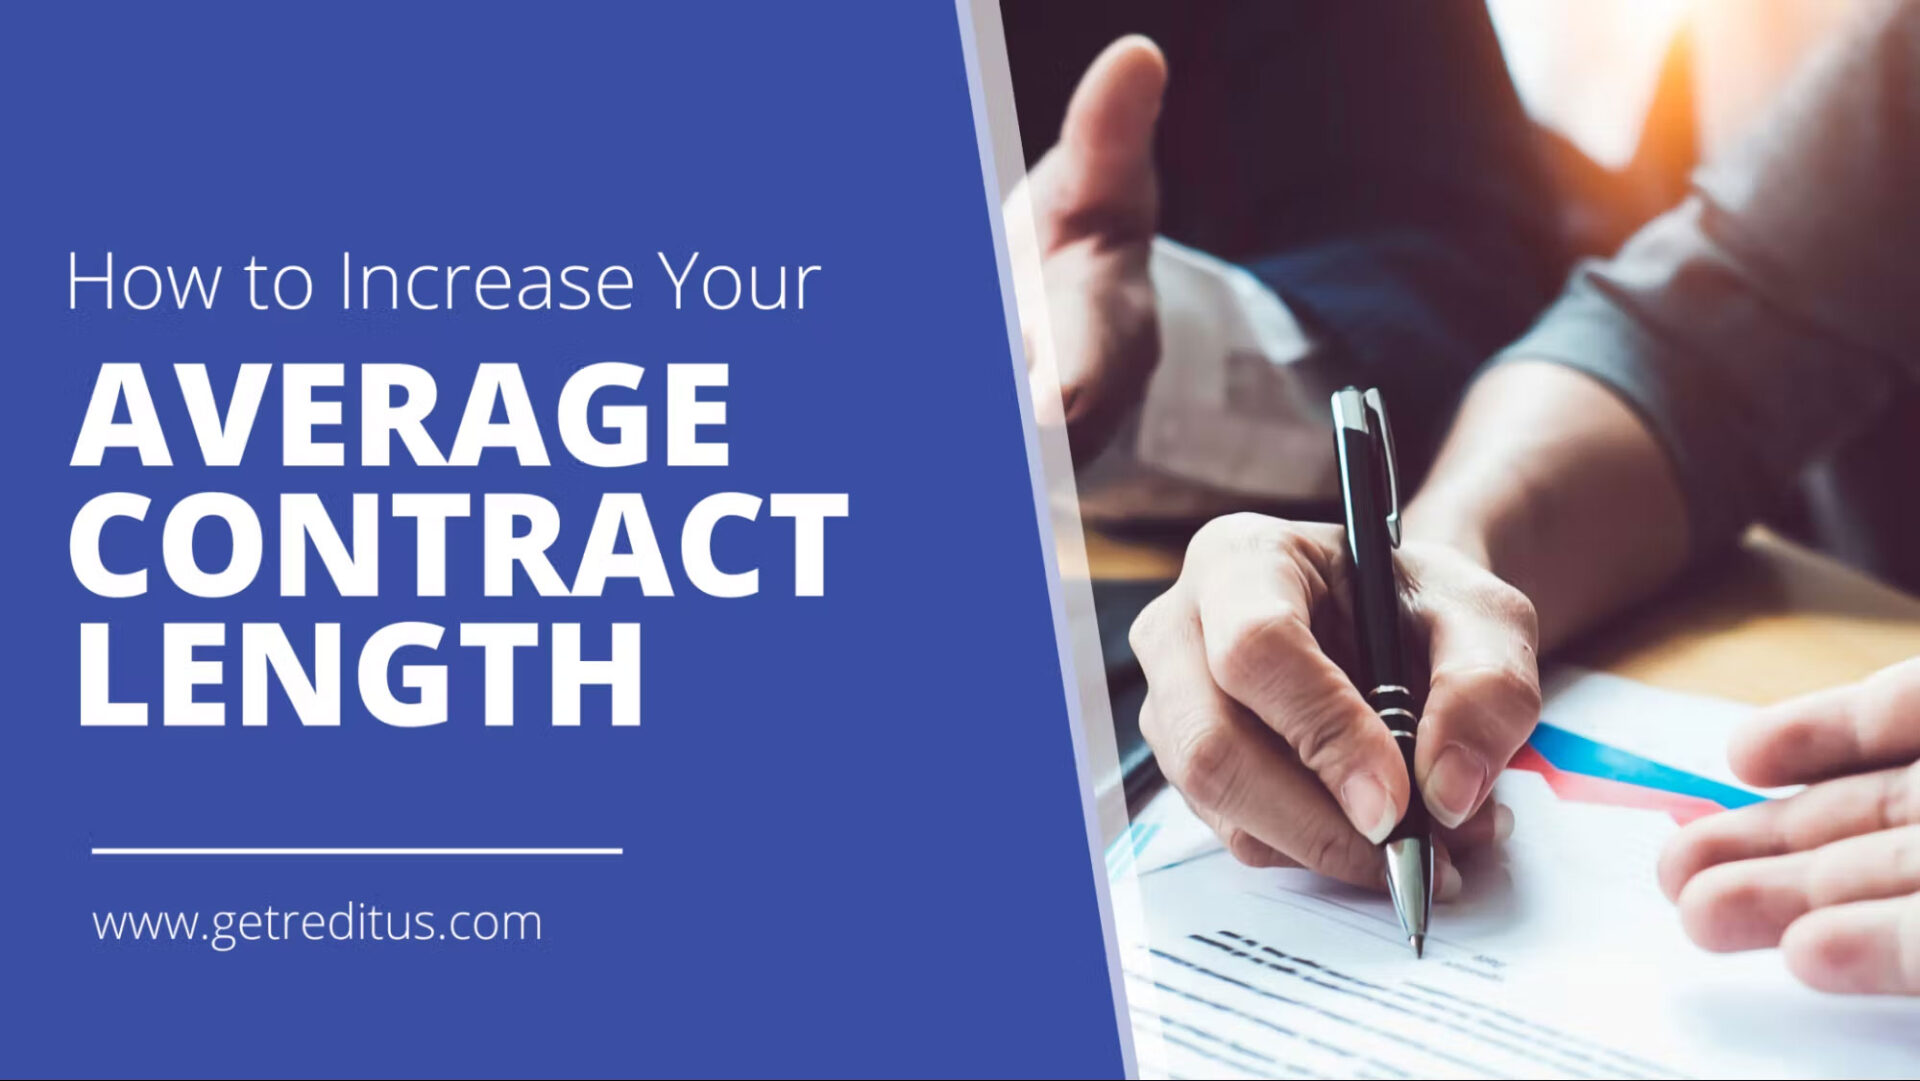 https://www.getreditus.com/blog/increase-your-average-saas-contract-length/